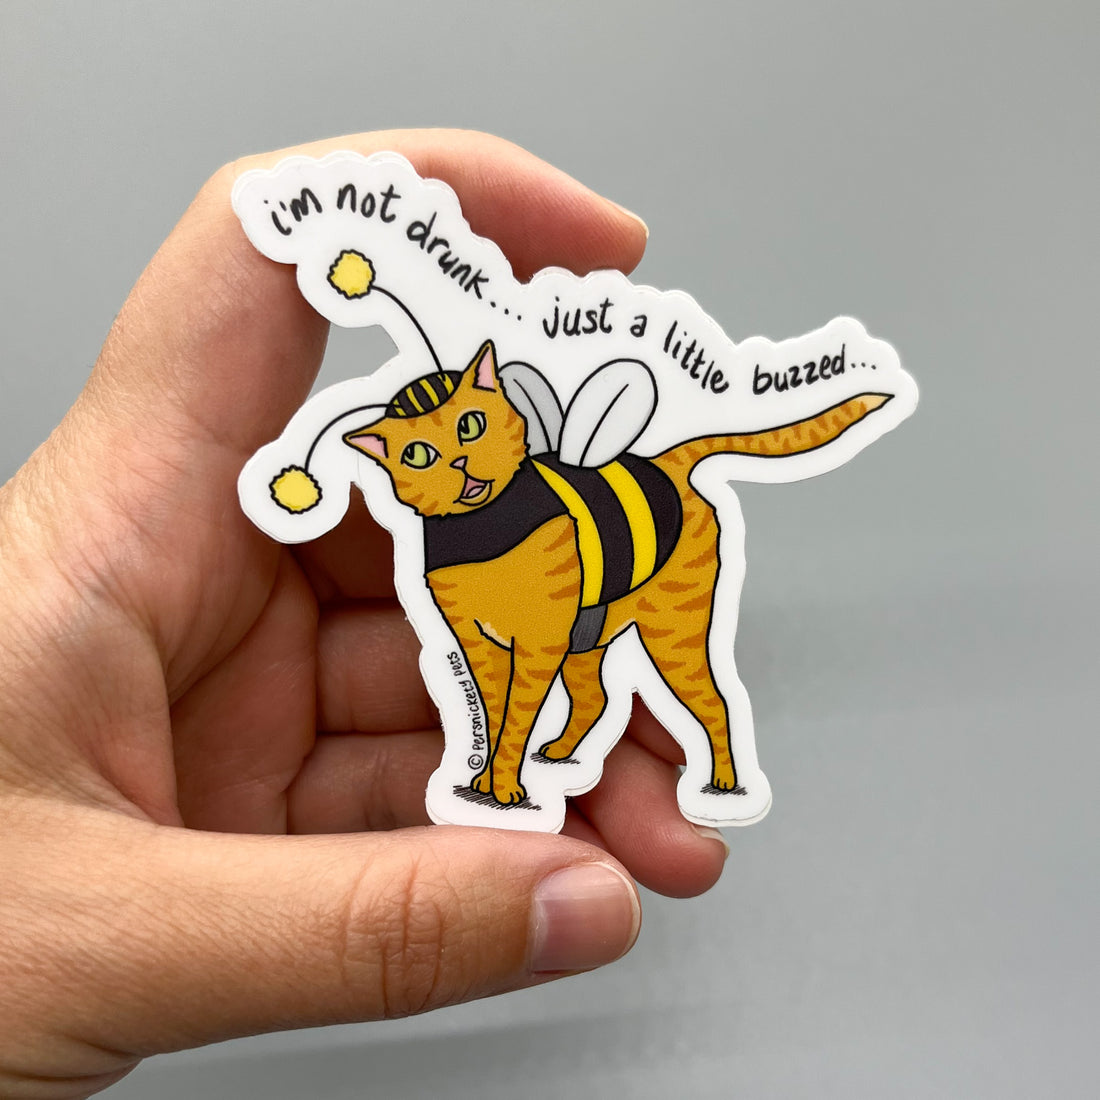 Persnickety Pets: Marmalade buzzed vinyl sticker in hand